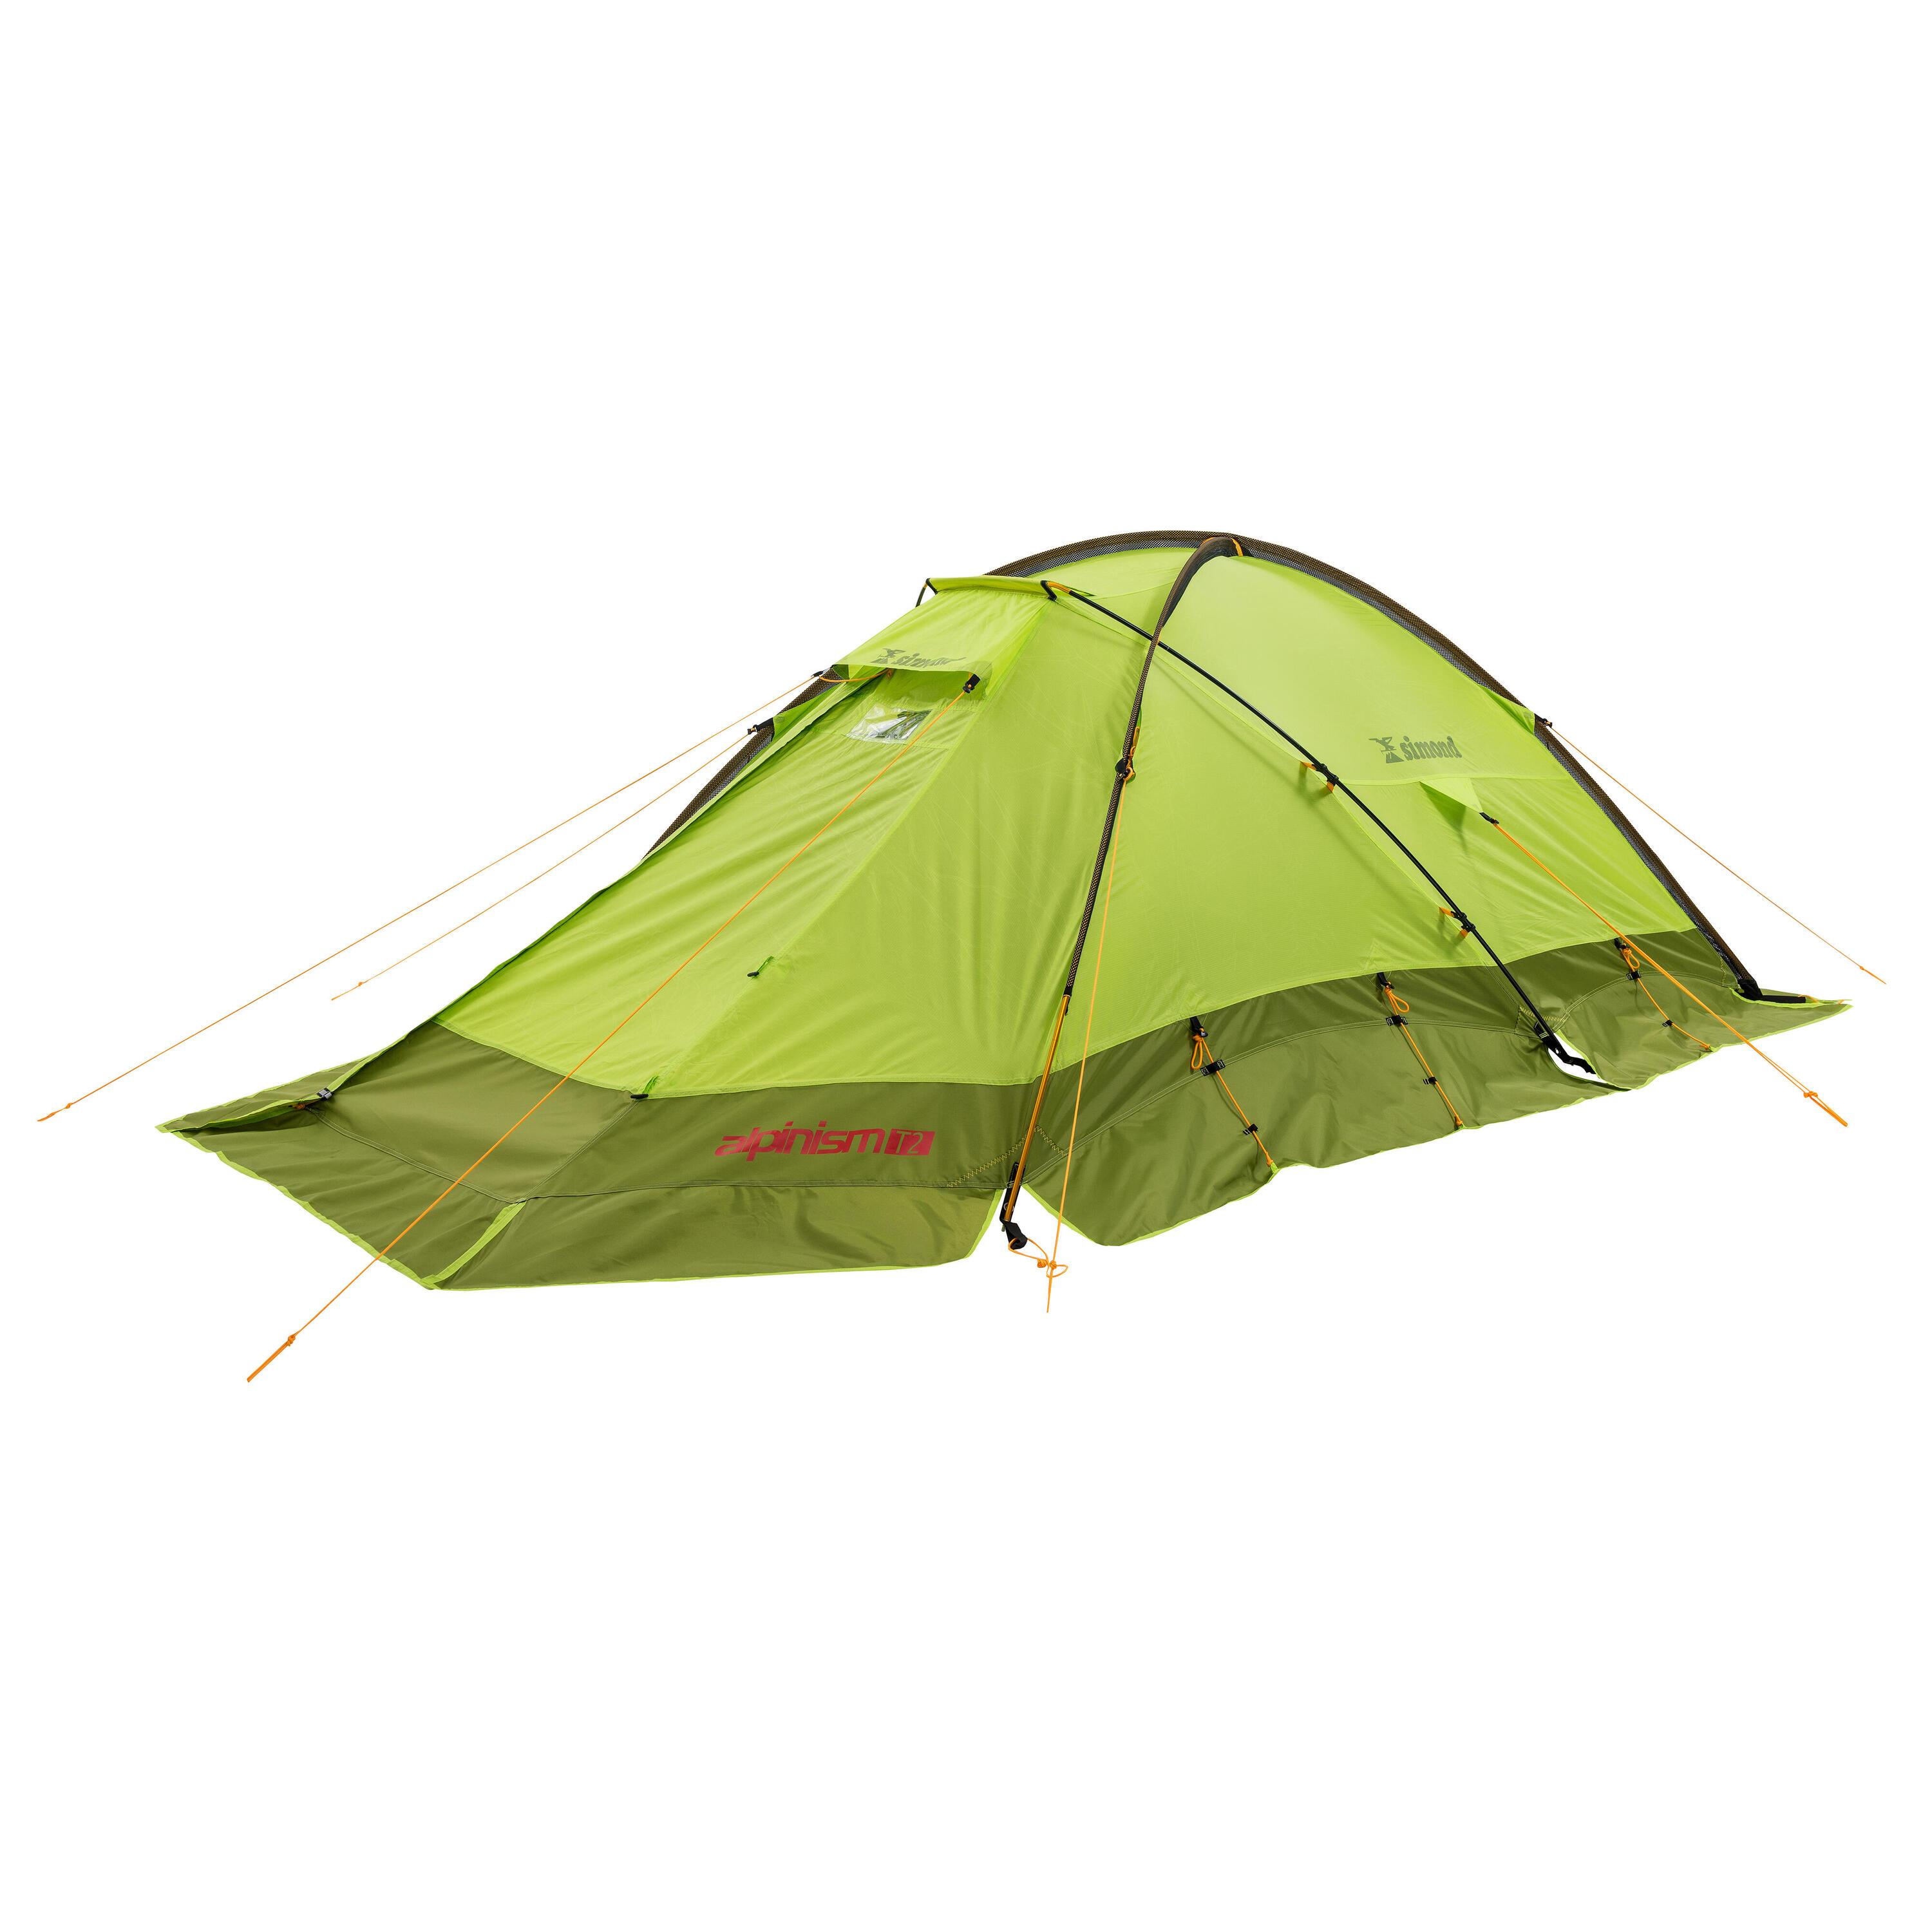 2-person mountaineering tent - Makalu T2 1/8